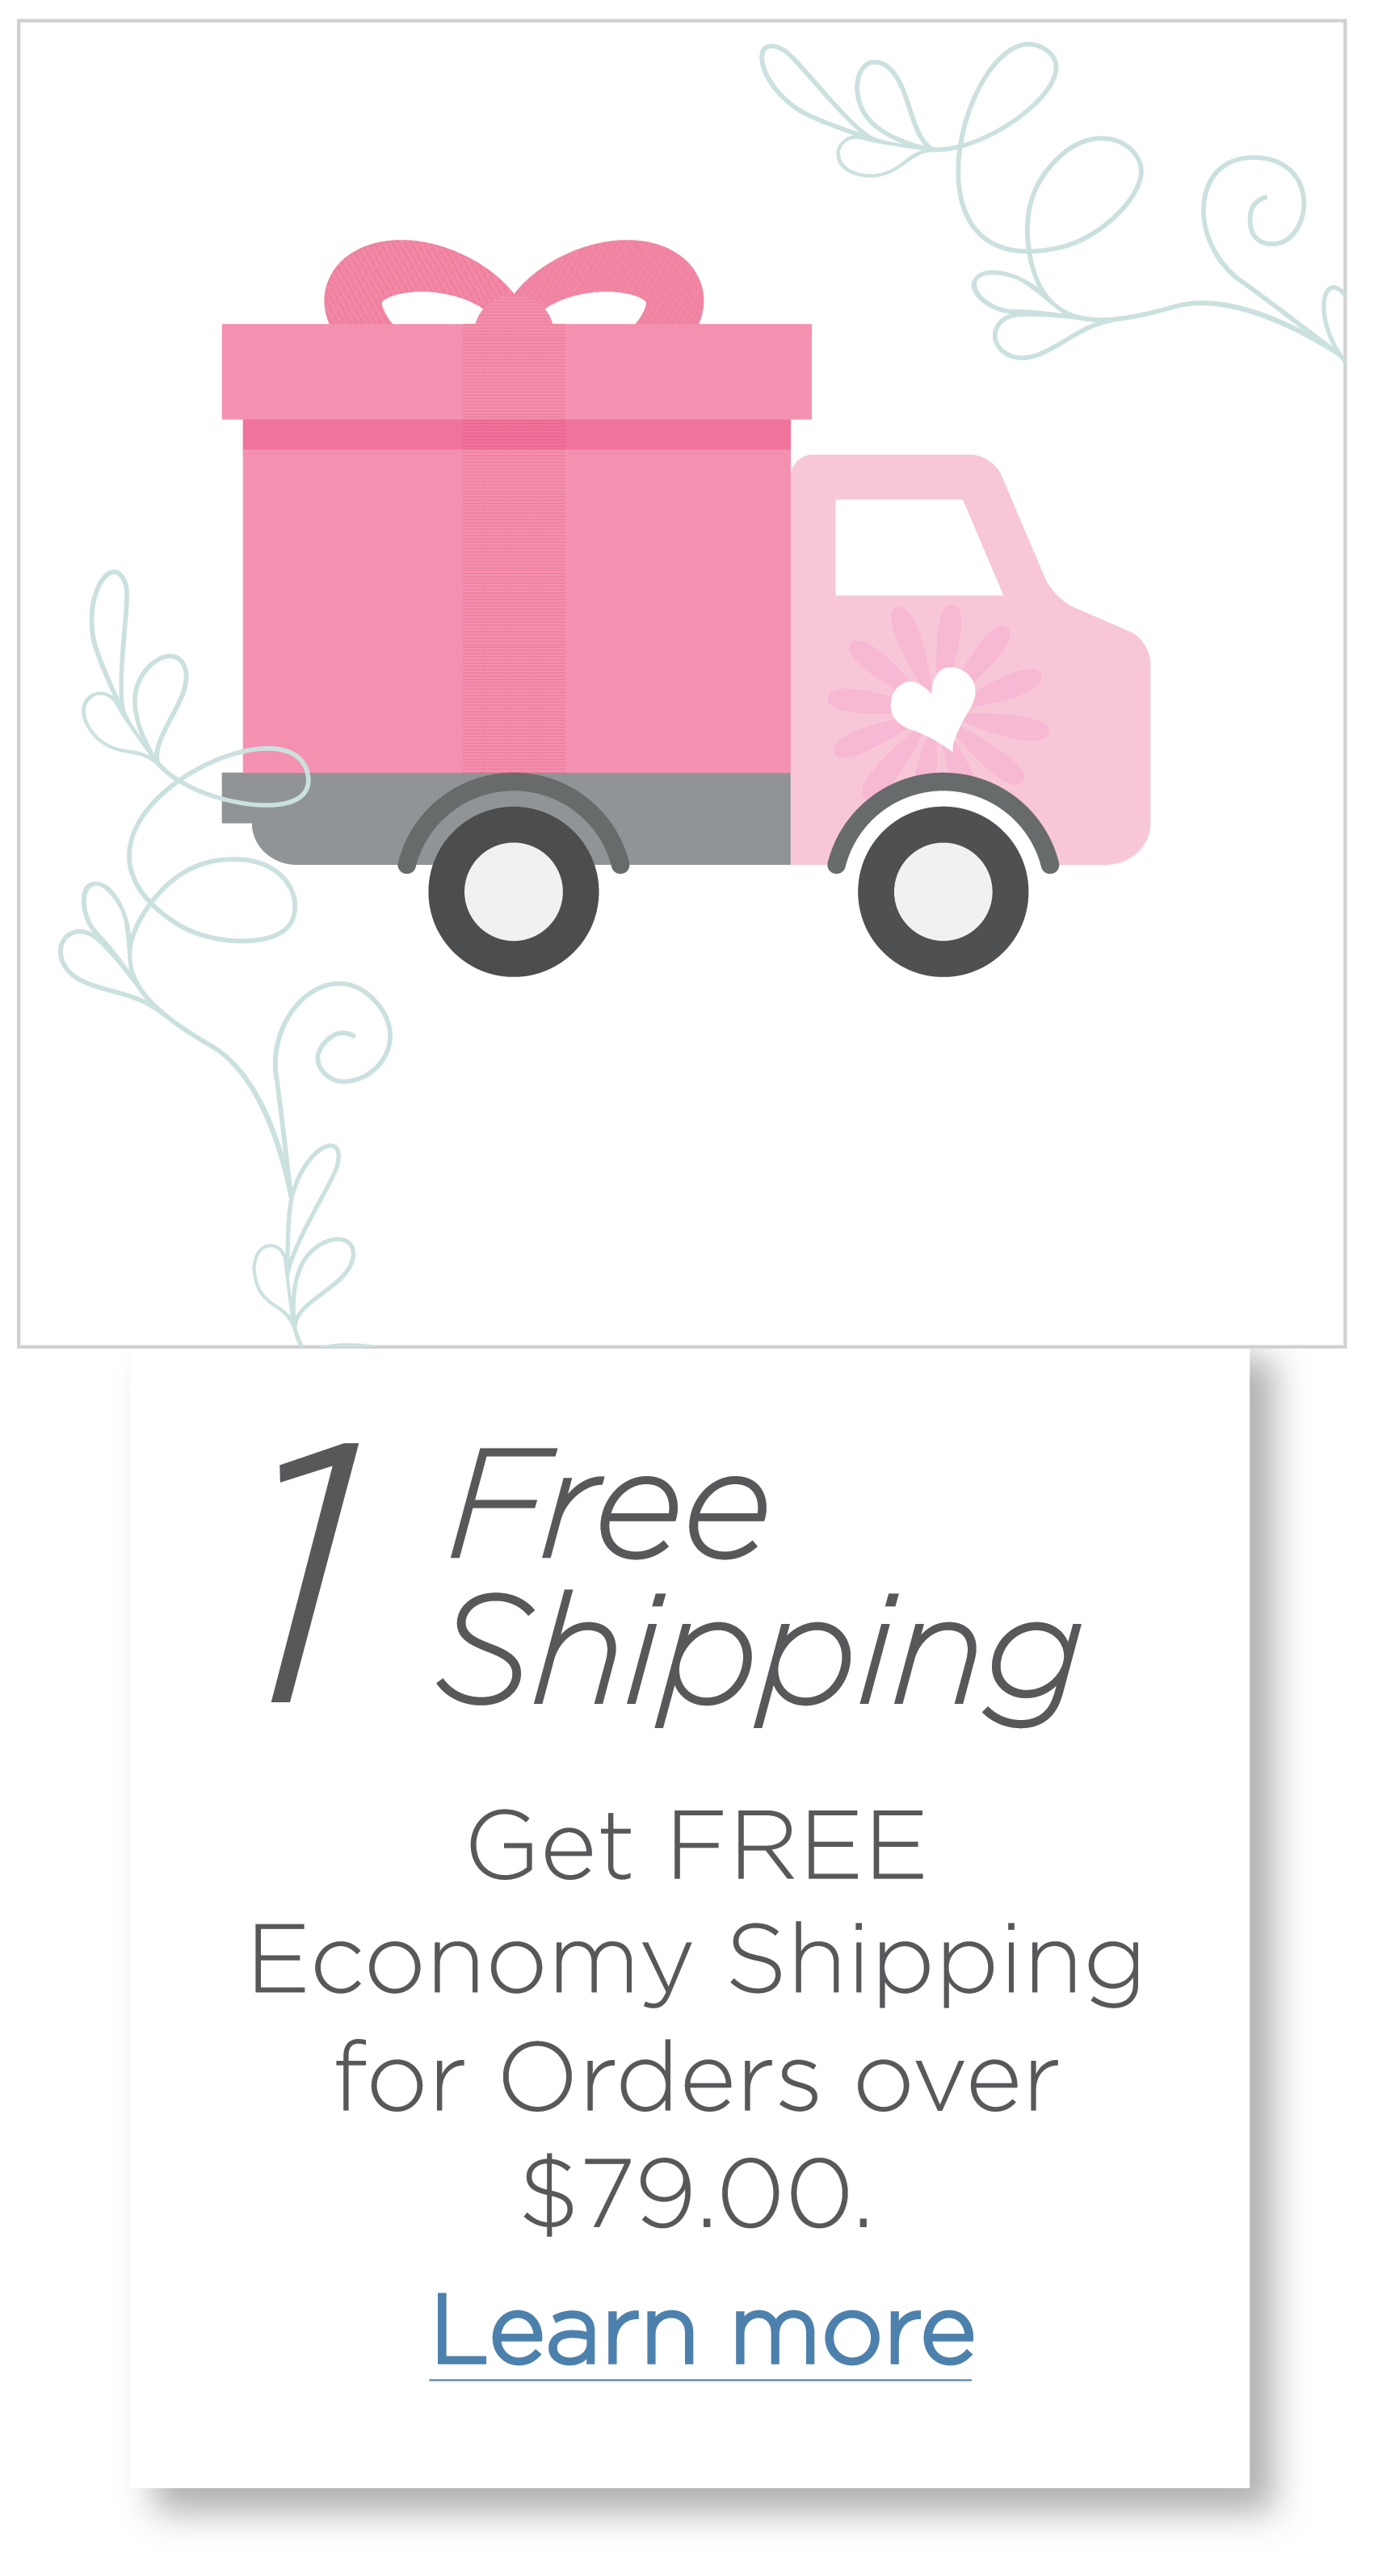 10 Ways to Get Free Shipping Supplies (Right Now!) - MoneyPantry